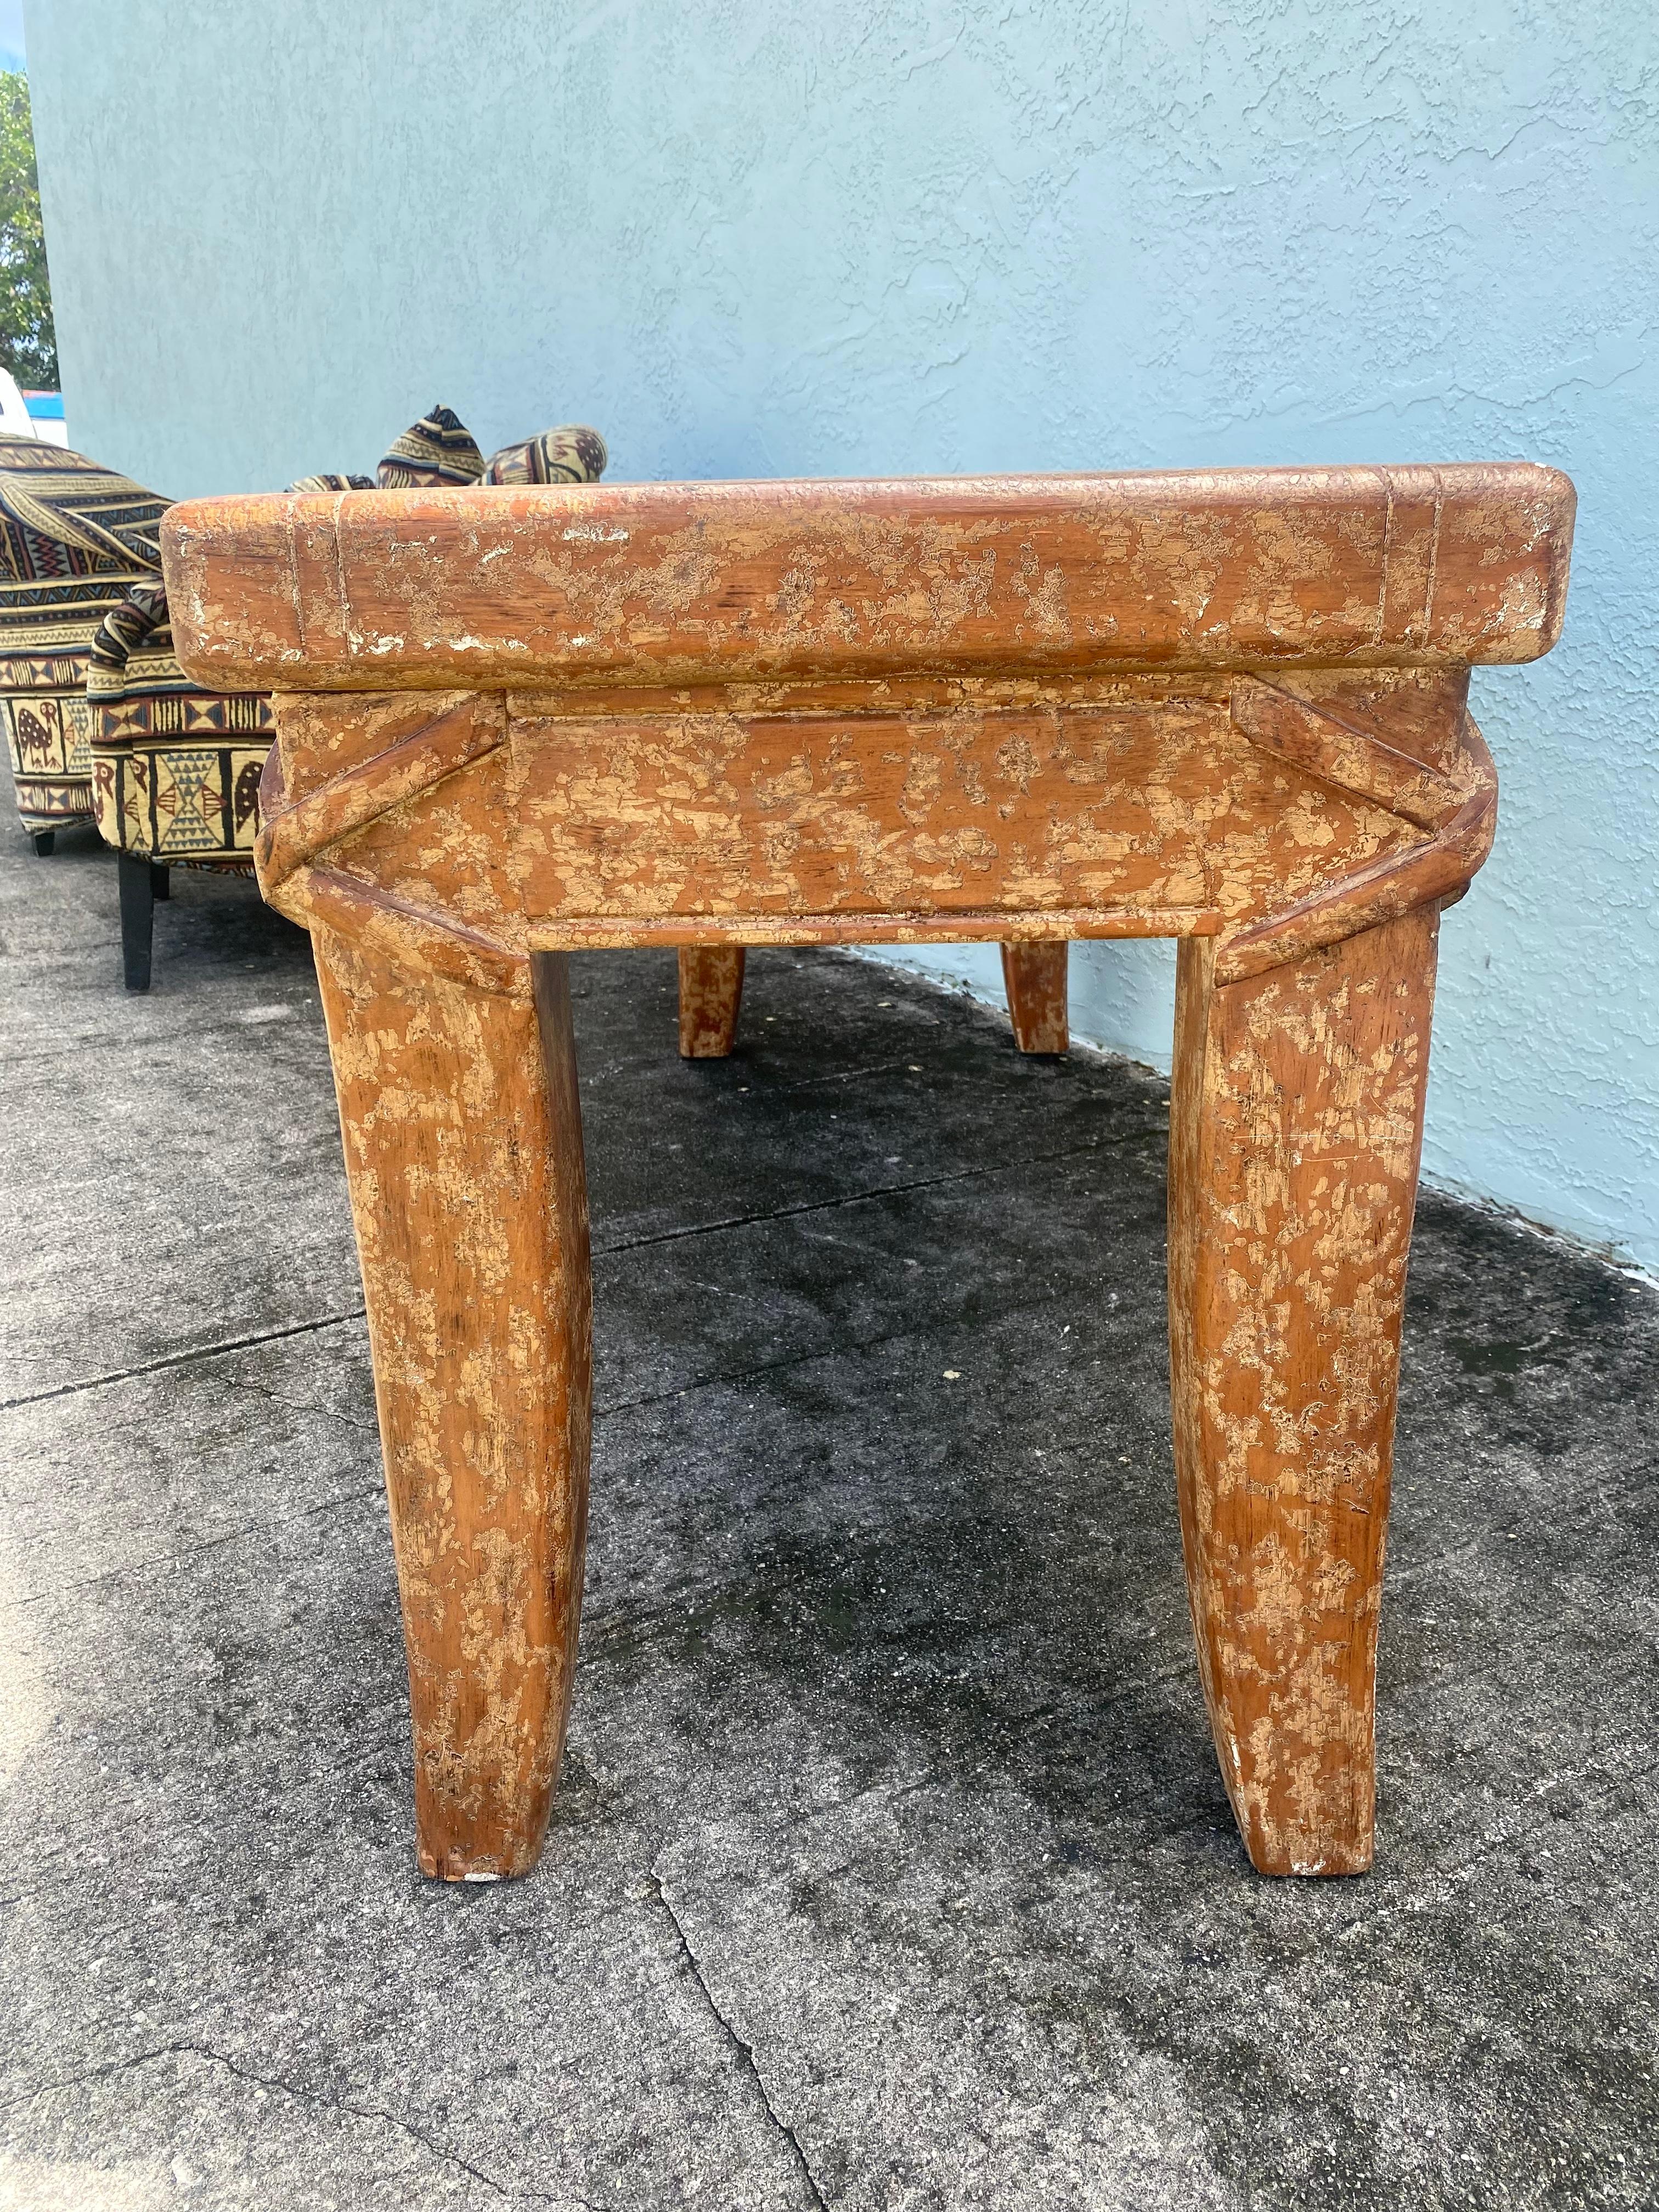 1940s Artistic Salmon Carved Textured Rustic Farmhouse Wood Console Table Desk For Sale 1